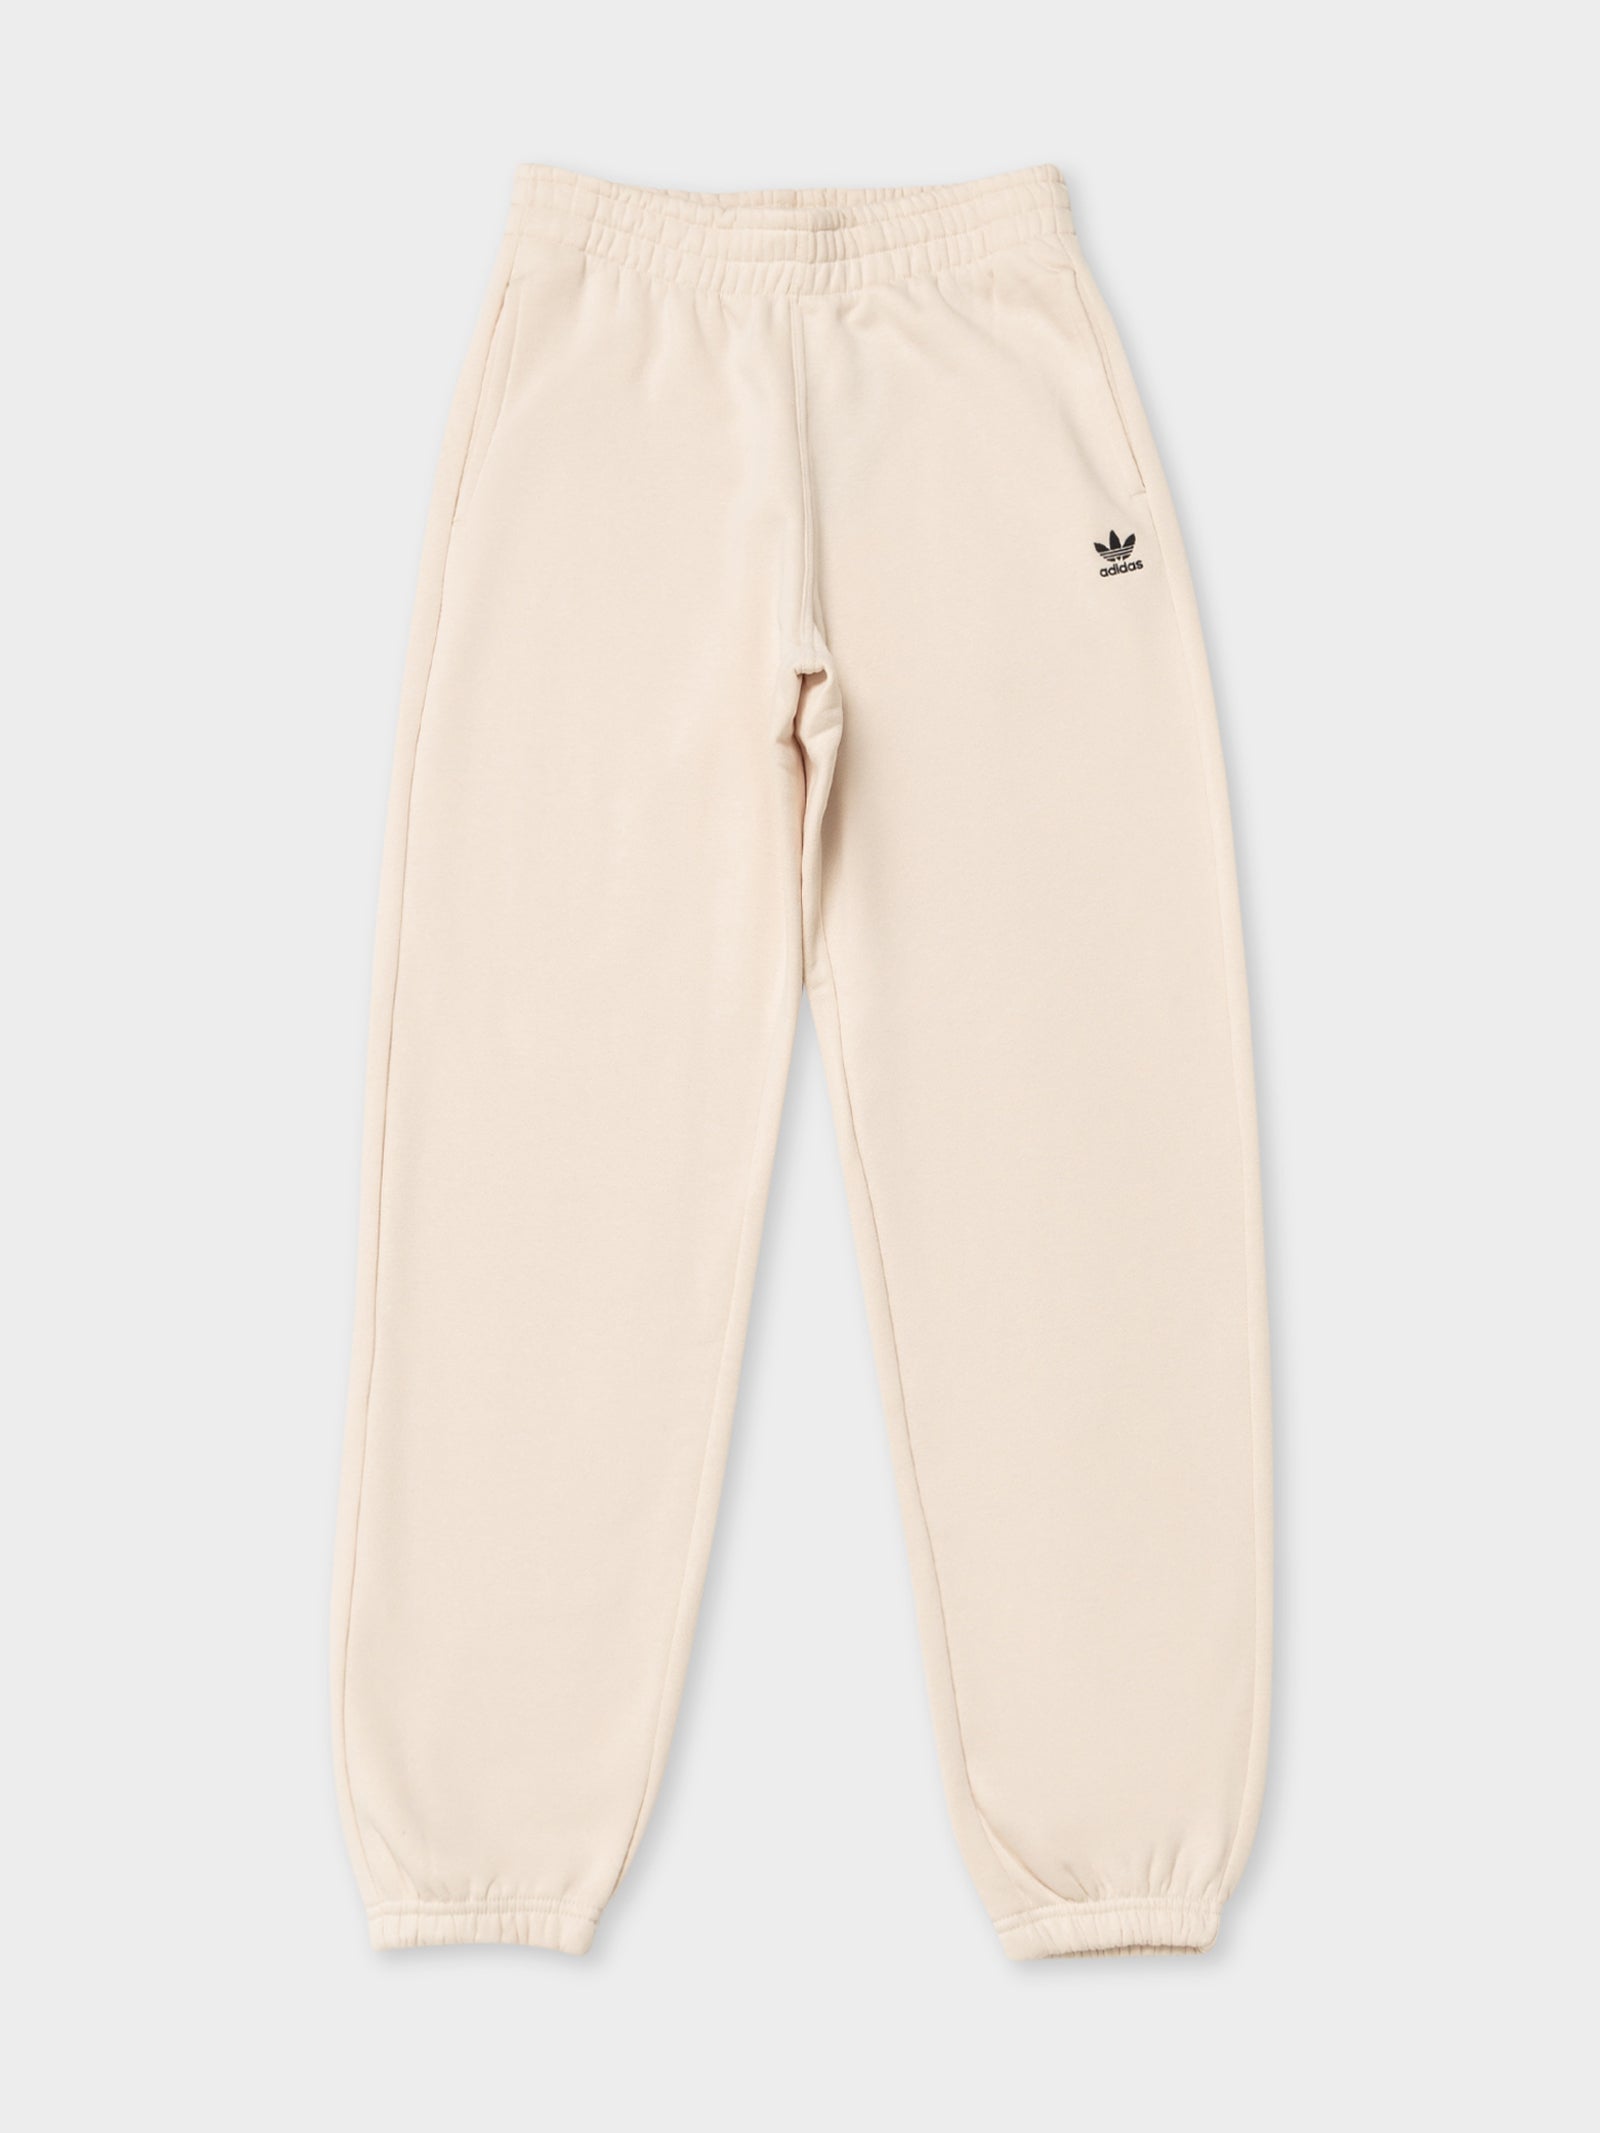 adidas 3-Stripes High-Rise Ruched Pants - Beige